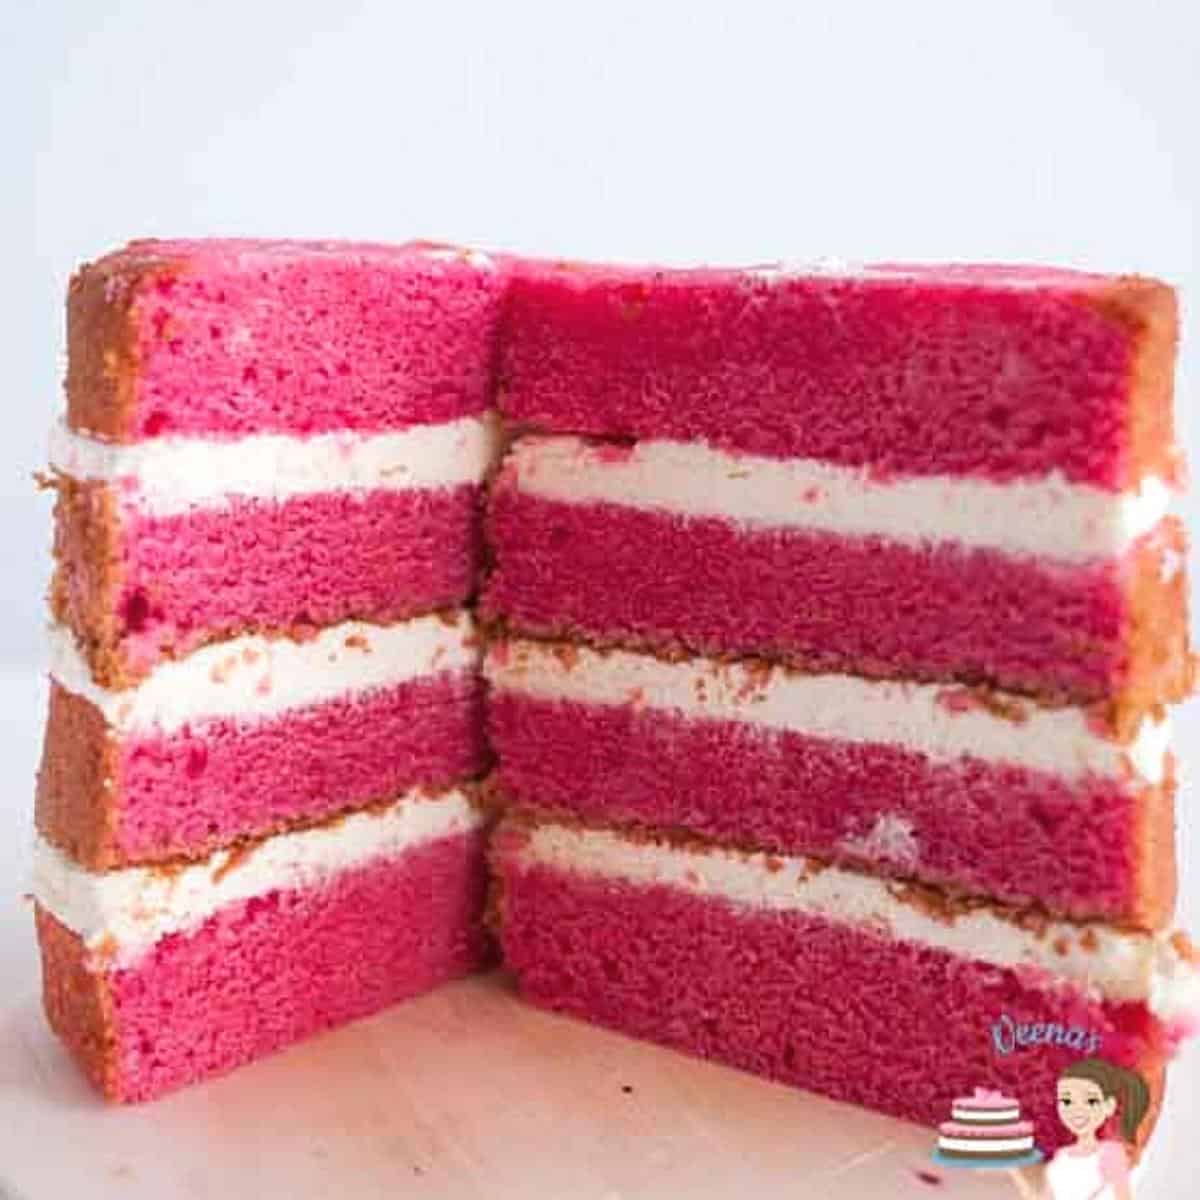 Layers of strawberry cake with Swiss meringue buttercream.